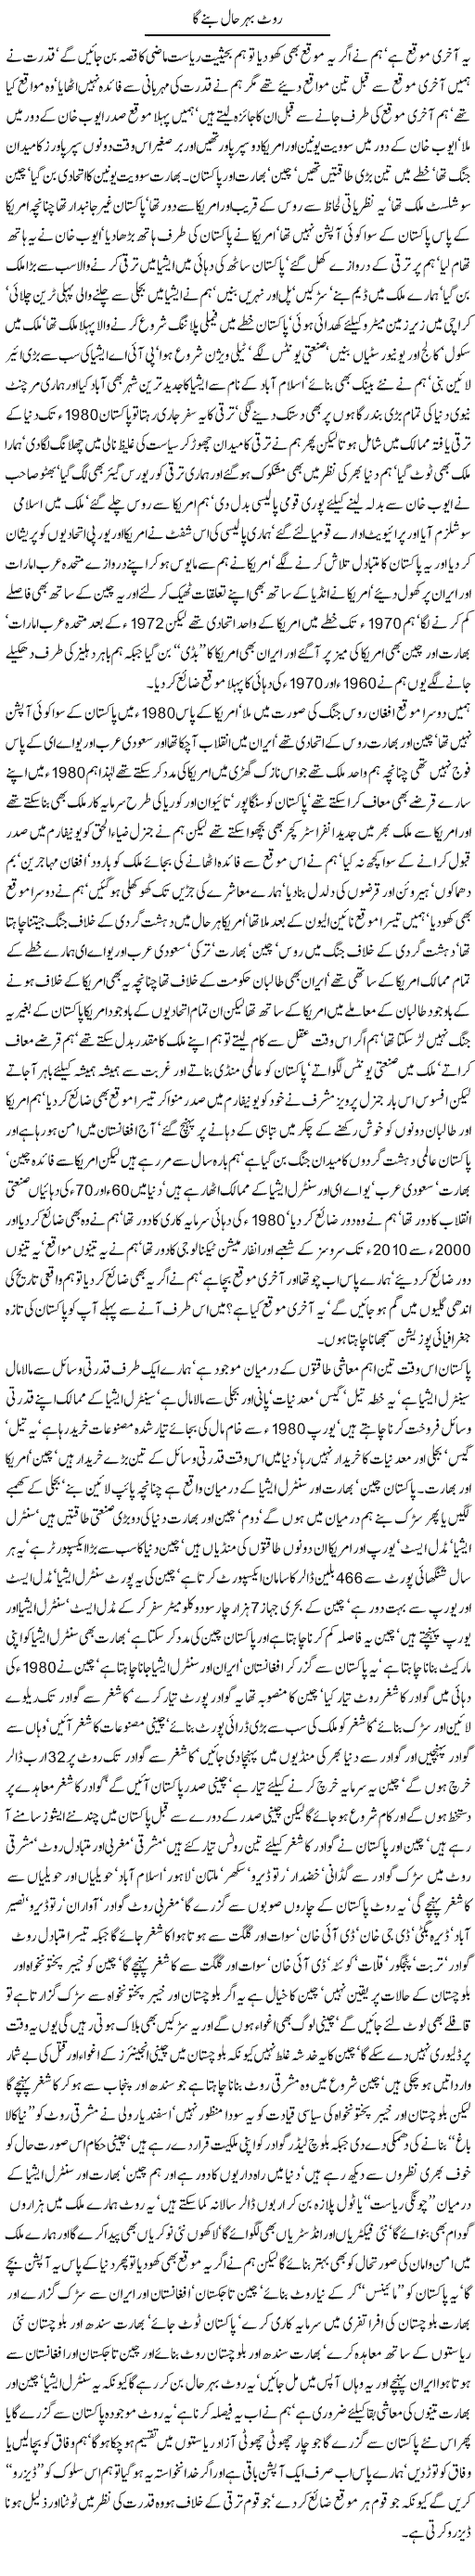 Route Baher Hall Bune ga by Javed Chaudhry